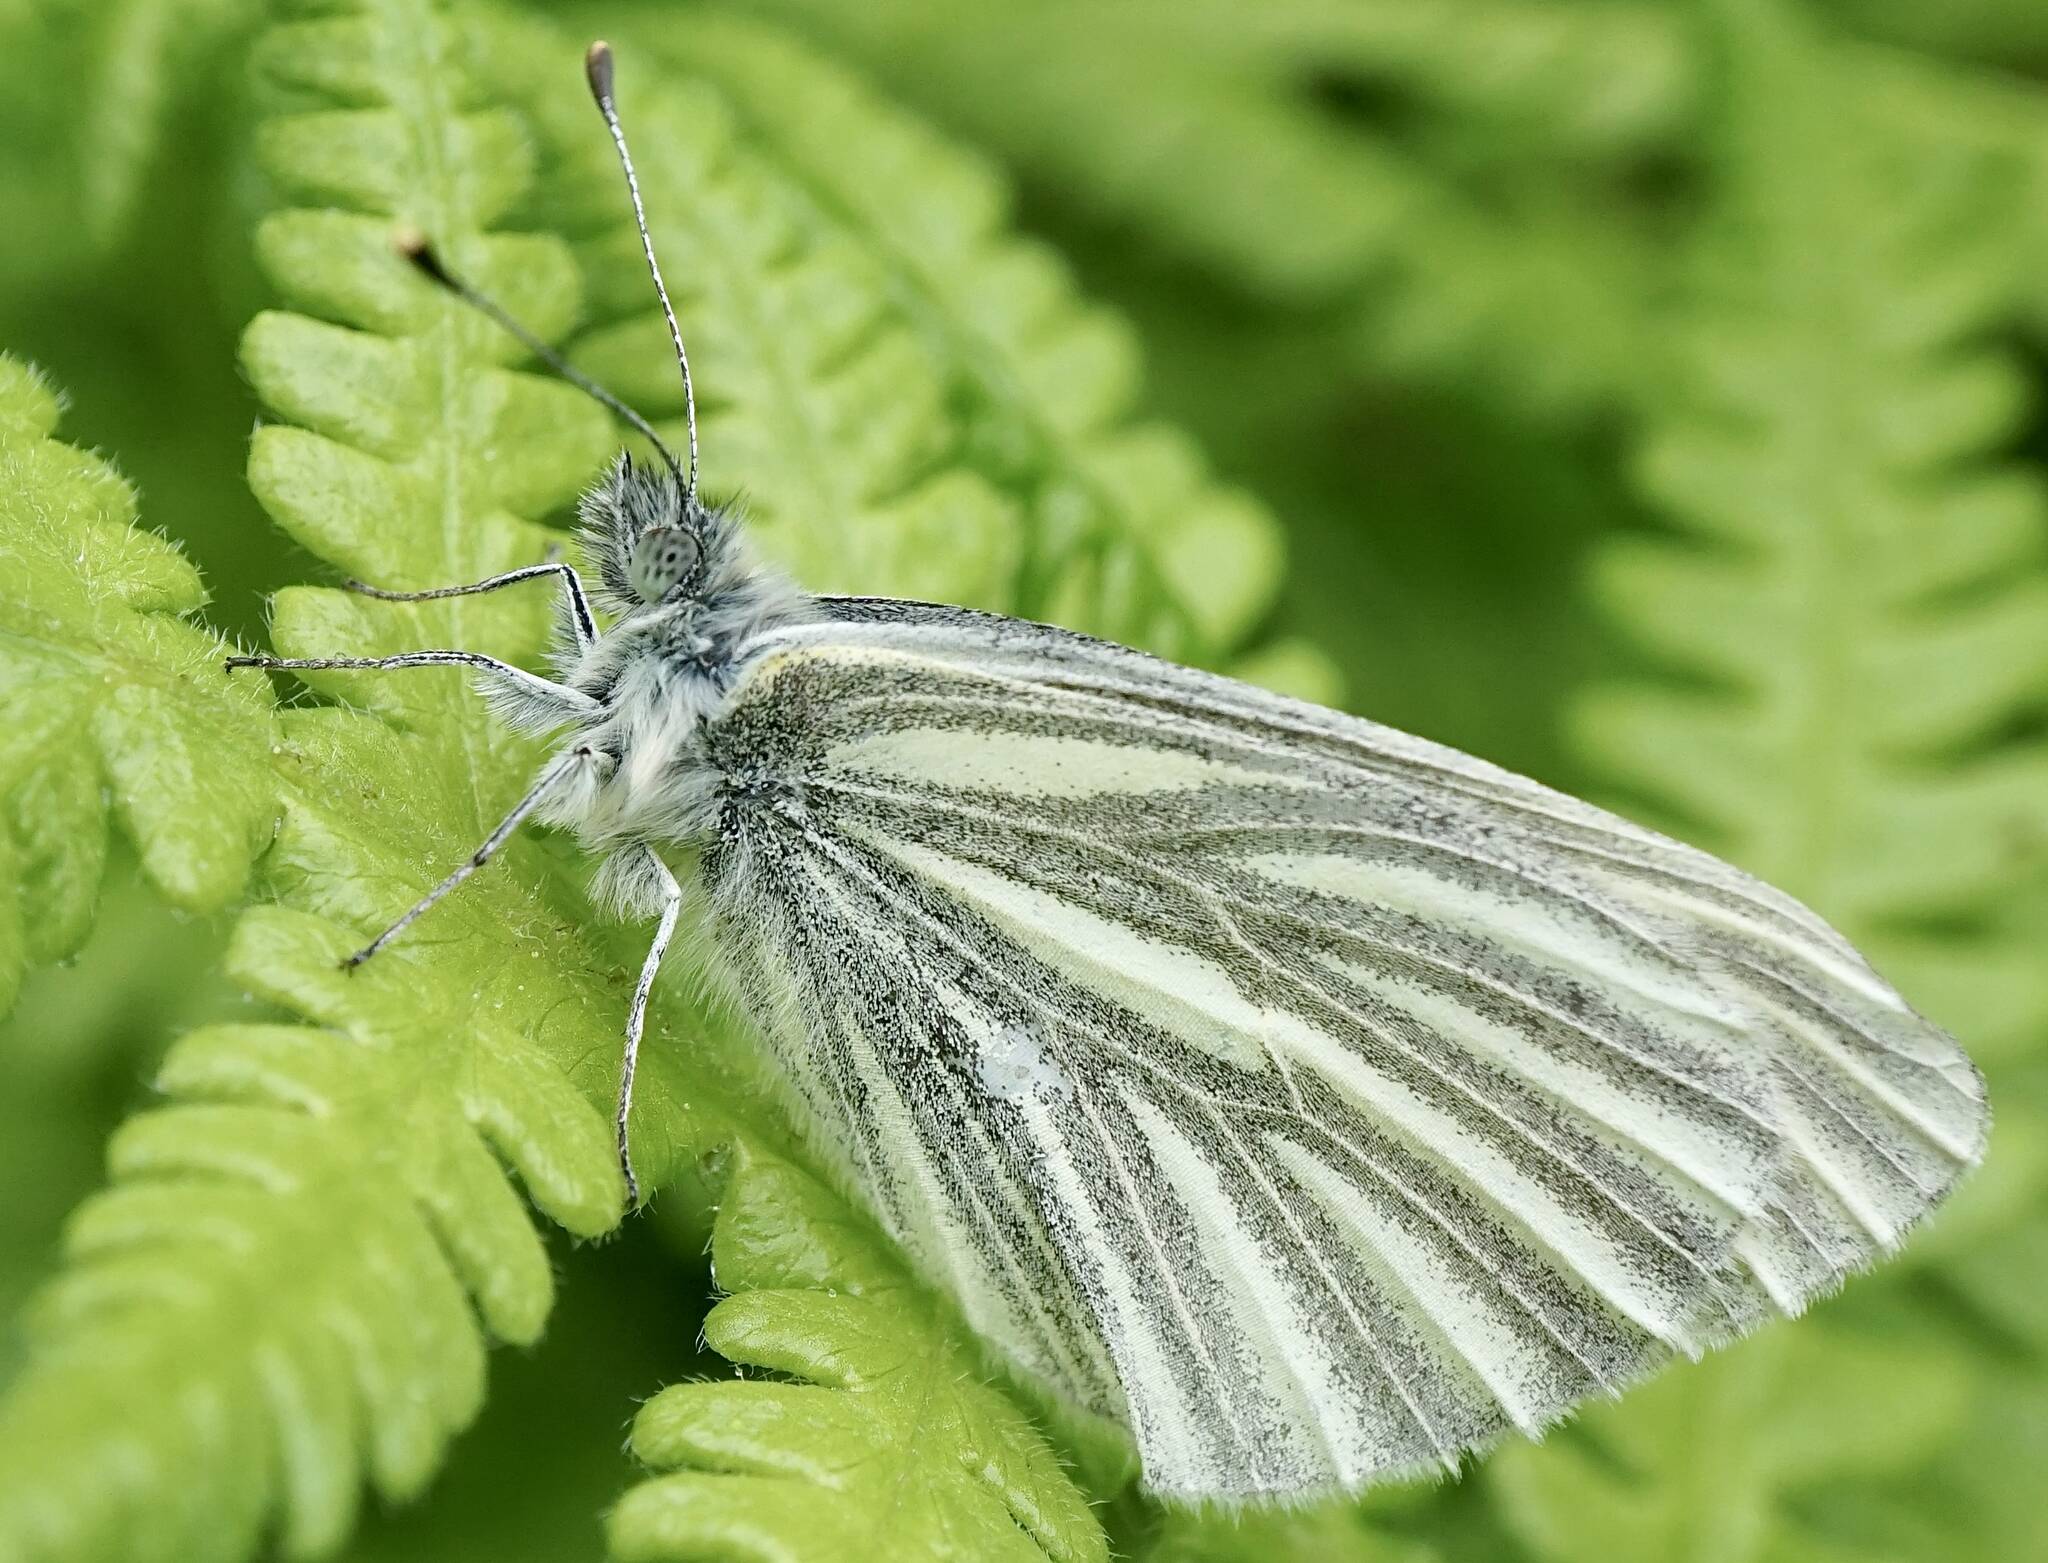 A white butterfly rests upon a fern Saturday at Prince of Wales Island. (Courtesy Photo / Marti Crutcher)